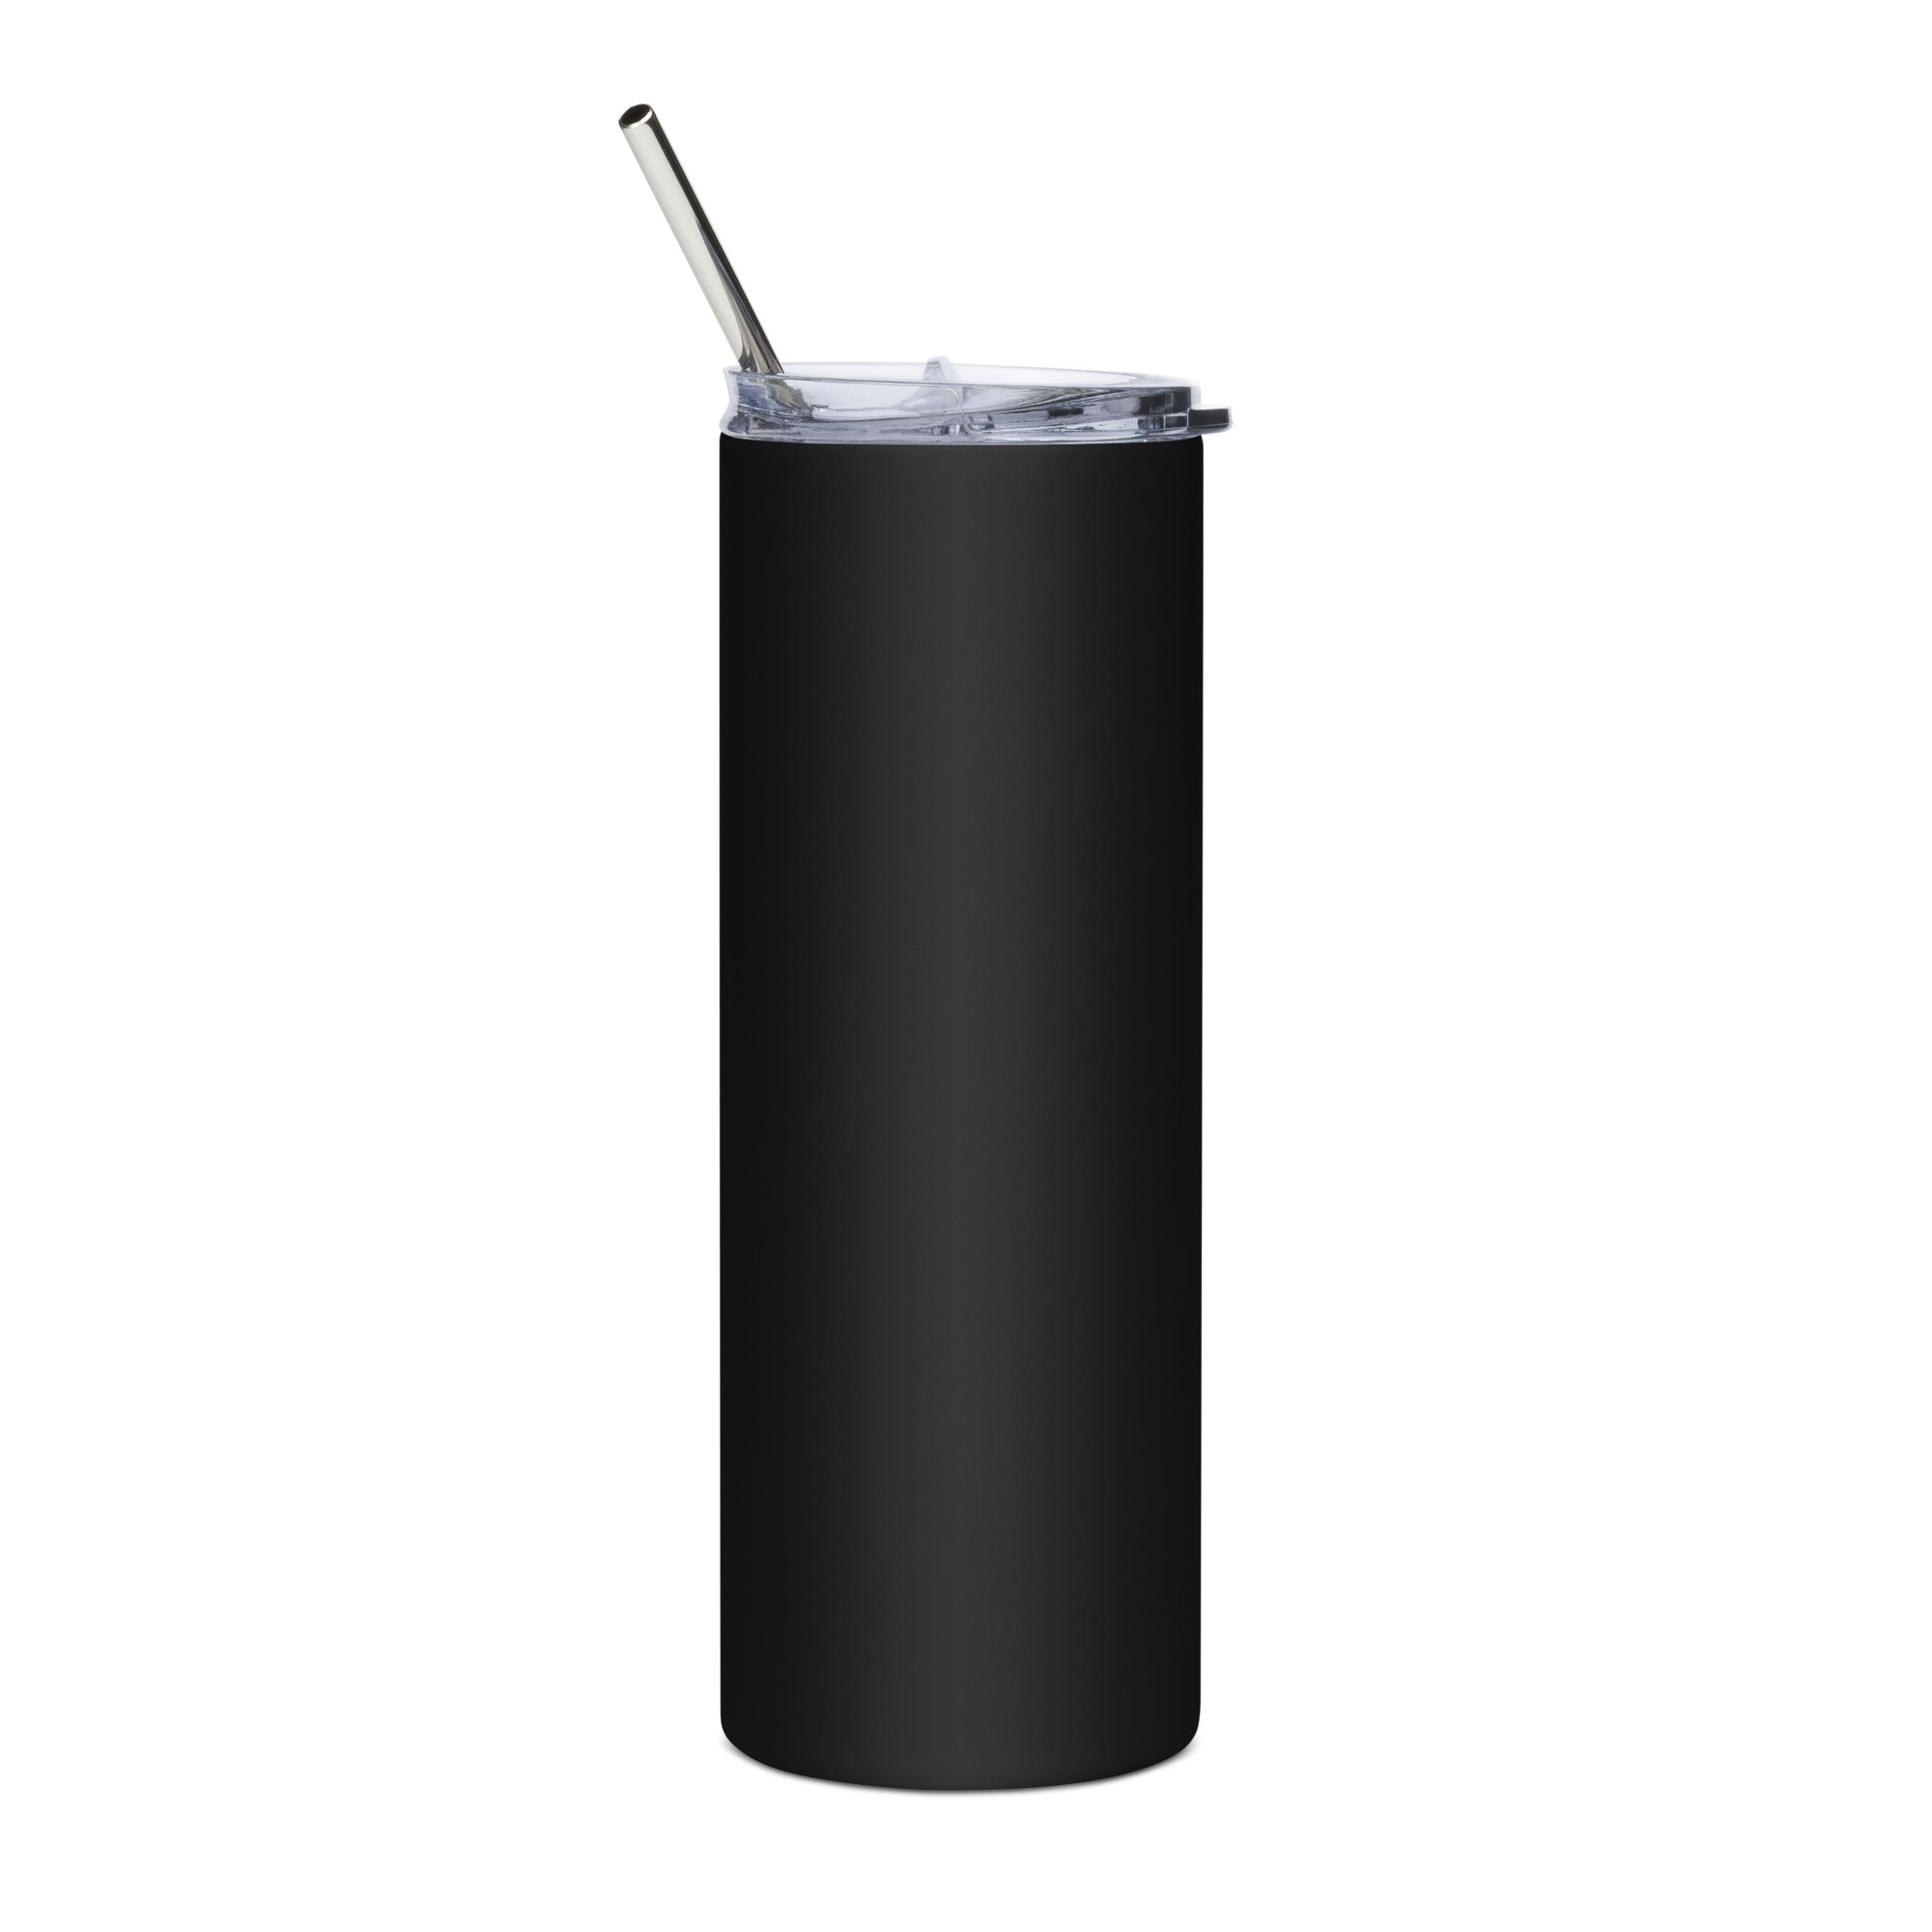 Classic Rewind: Stainless Tumbler